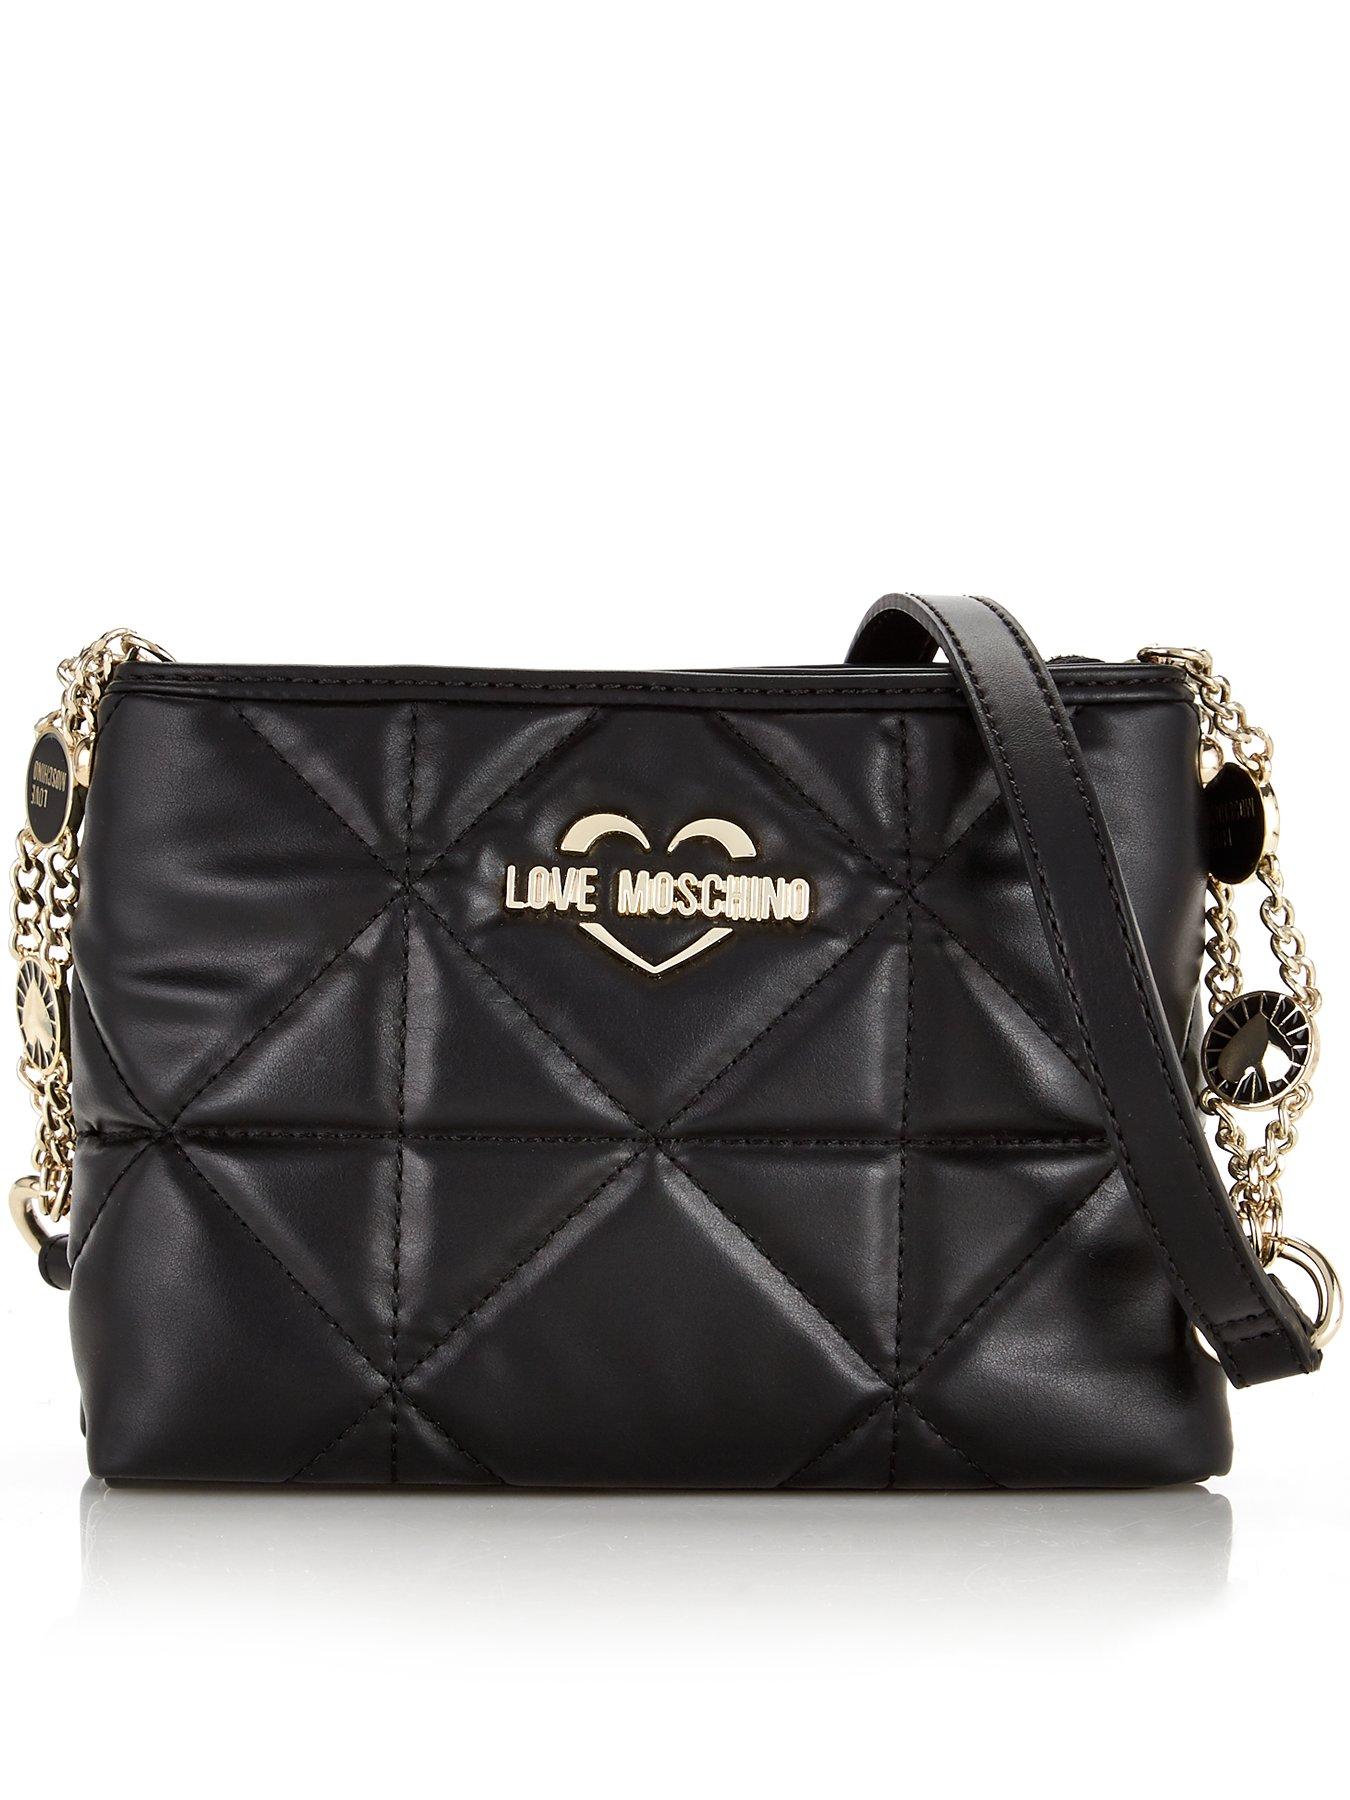 LOVE MOSCHINO Quilted Cross-body Bag 